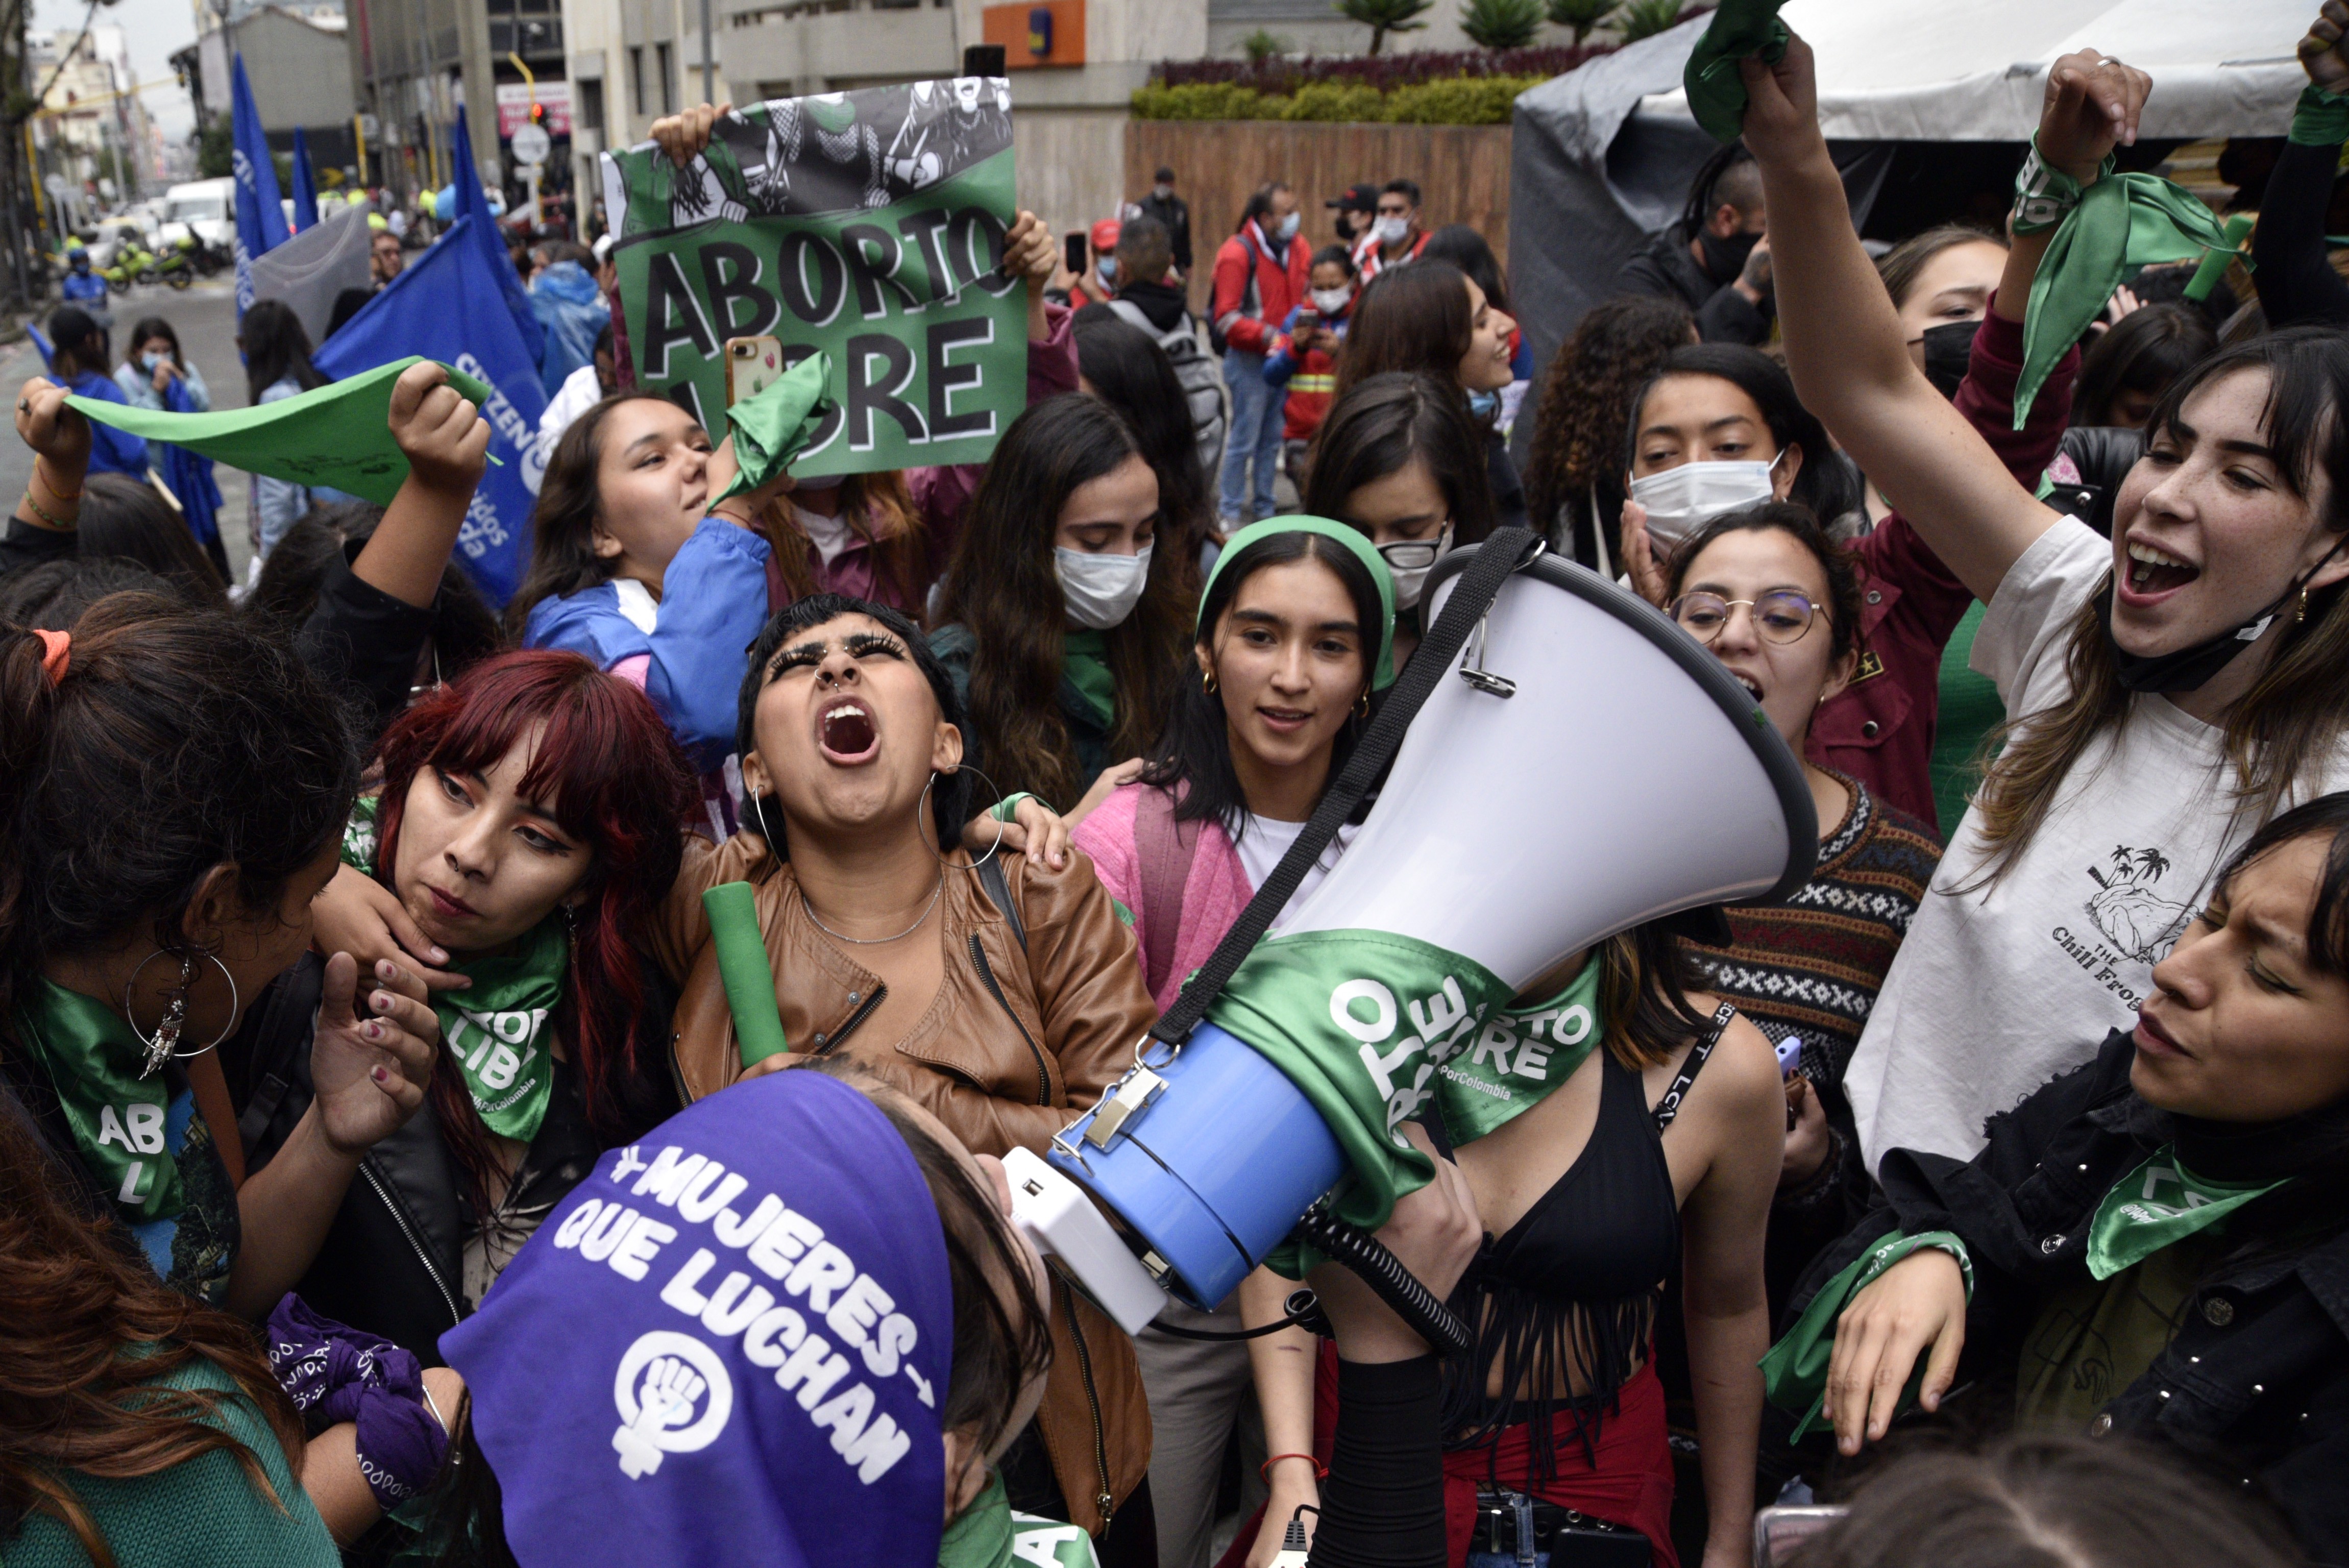 BOGOTA, COLOMBIA - FEBRUARY 21: Pro-Choice demonstrators celebrate outside the Justice Palace after the Constitutional Court voted in favor of decriminalizing abortion up to 24 weeks of gestation on February 21, 2022 in Bogota, Colombia. Since 2006, abort (Foto: Getty Images)